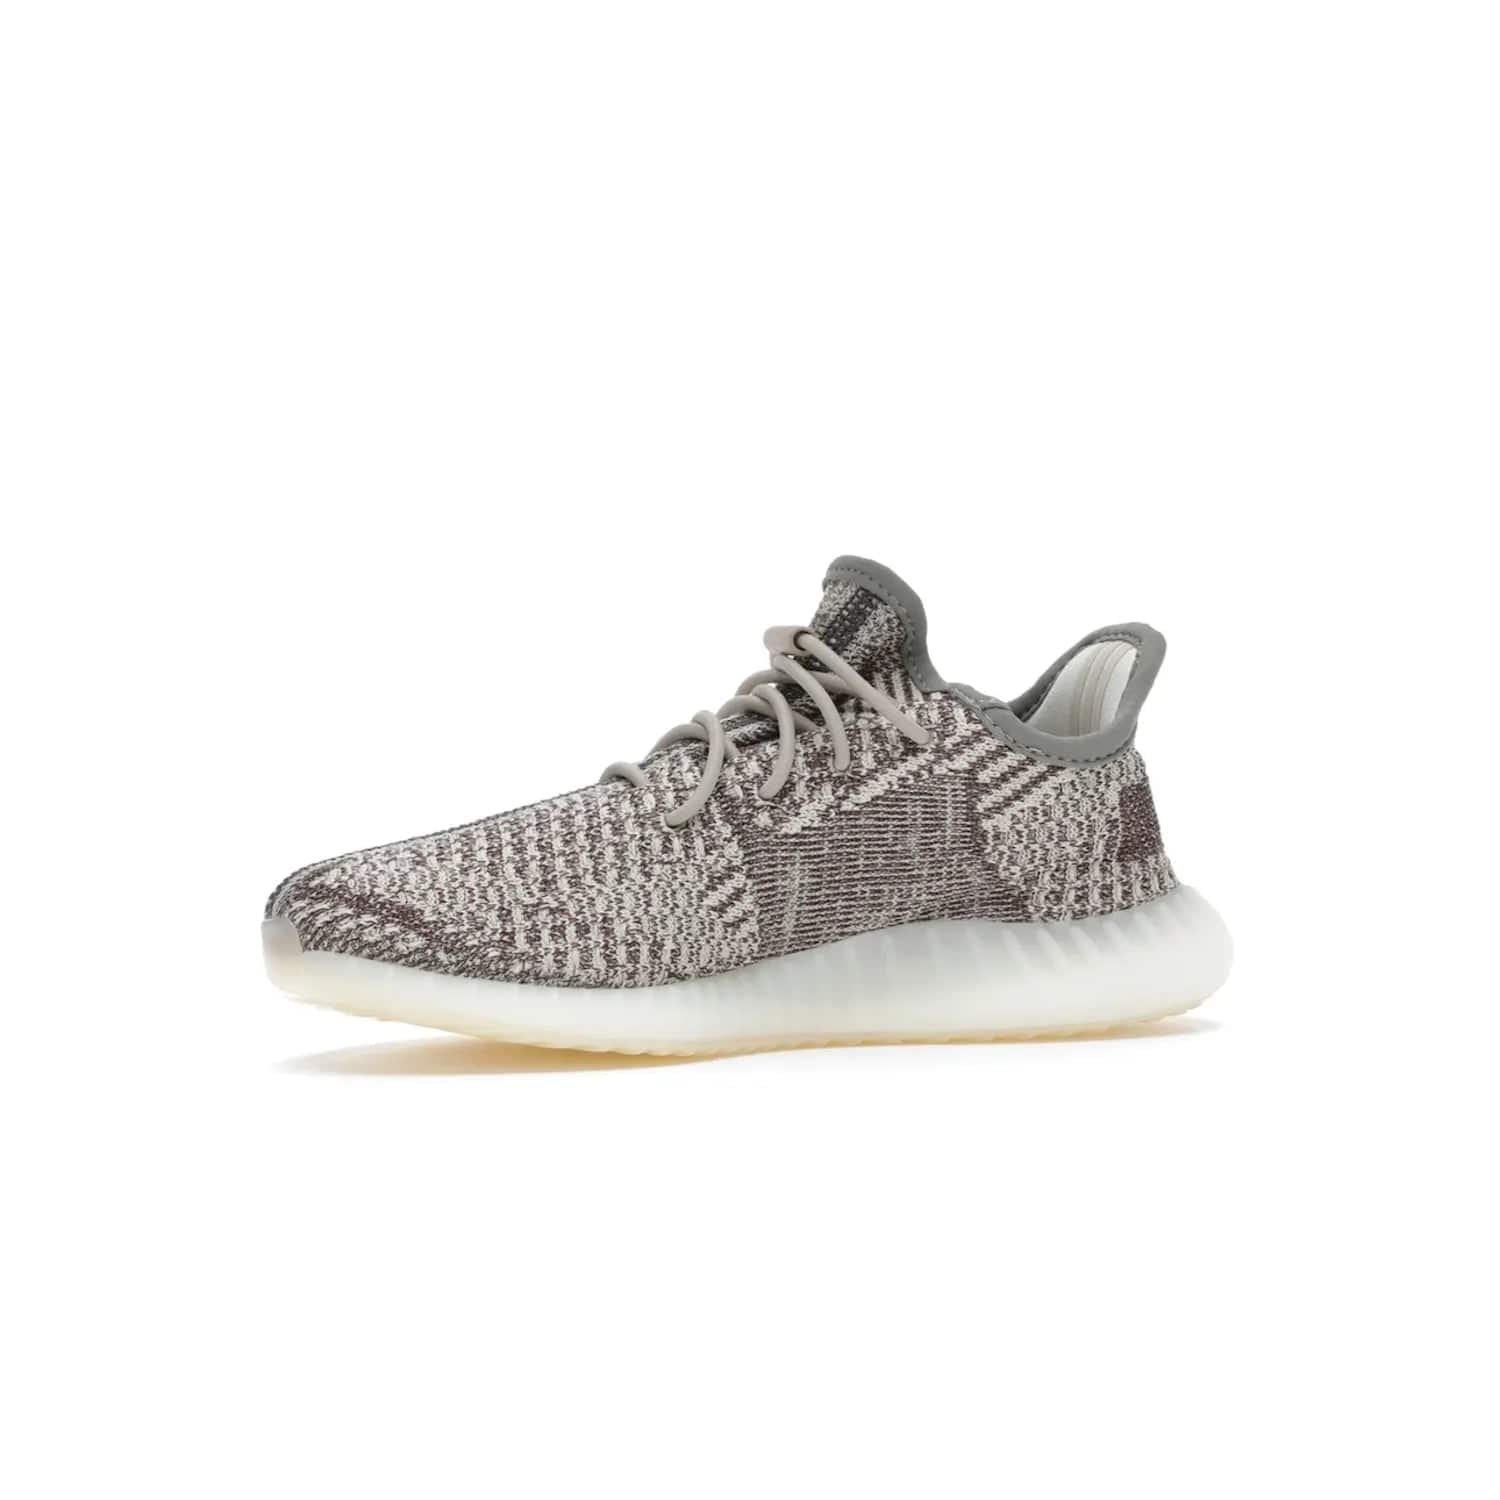 adidas Yeezy Boost 350 V2 Zyon (Kids) - Image 17 - Only at www.BallersClubKickz.com - The adidas Yeezy Boost 350 V2 Zyon (Kids) - perfect pick for fashion-savvy kids. Features soft Primeknit upper, lace closure & colorful patterning. Comfort & style for kids' summer outfits!